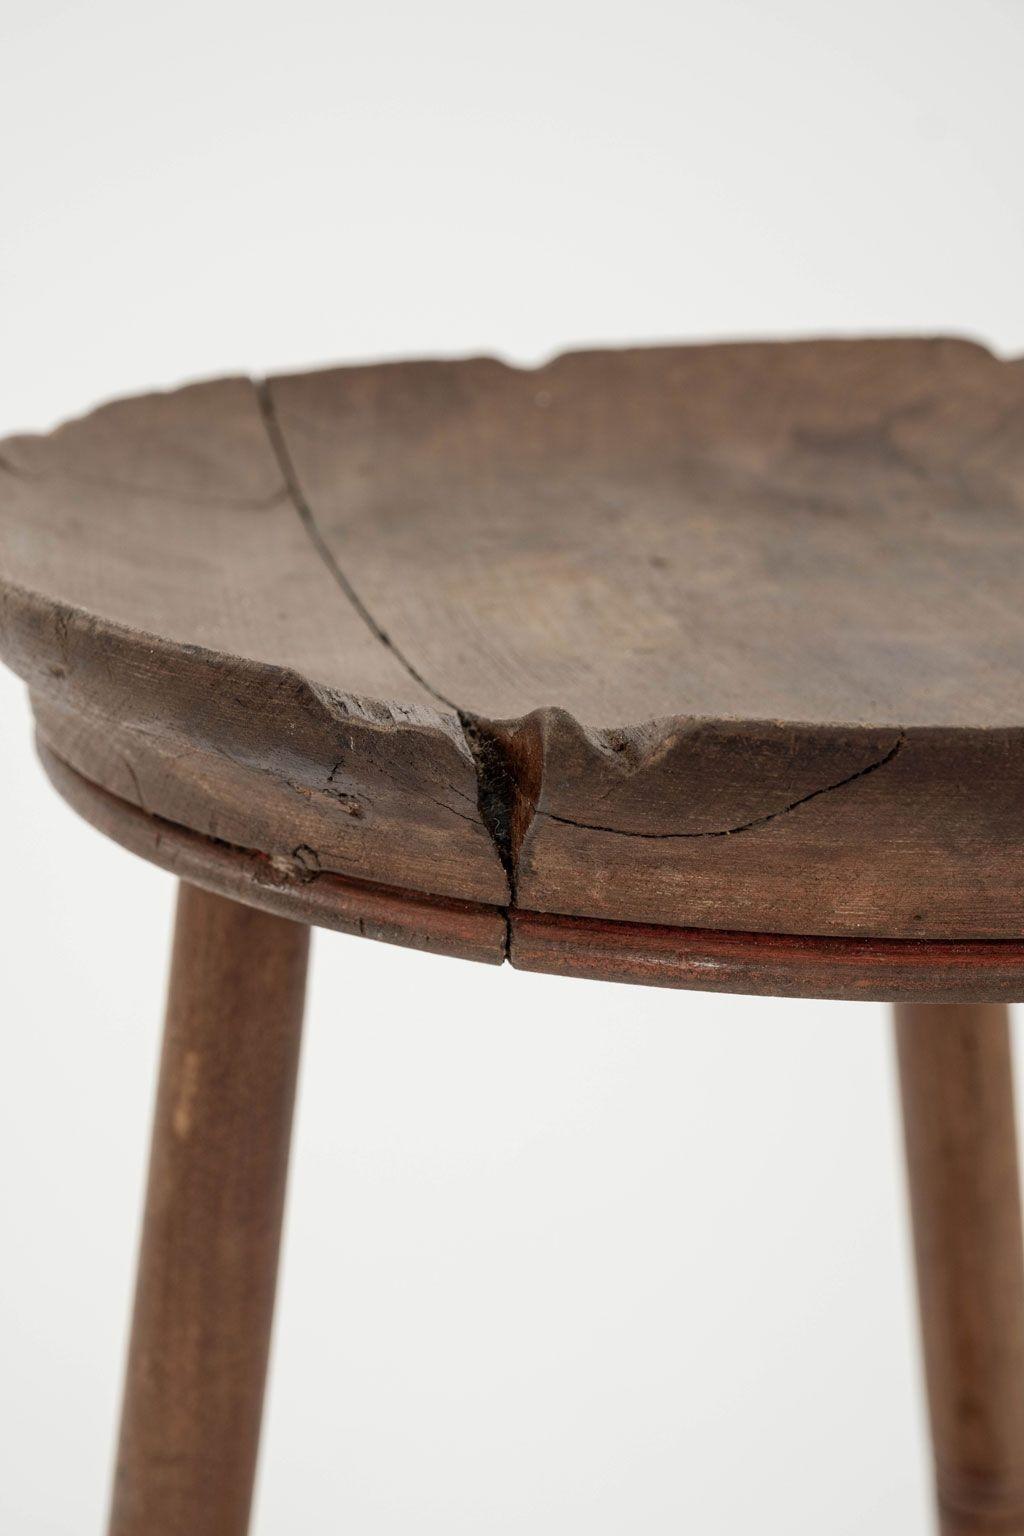 Arts and Crafts concave seated stool, circa 1890-1910, by James Shoolbred and Company. Sturdy decocative stool that can also serve as a drinks or small side table. Perfect amount of wear and wood separation. Made by James Shoolbred & Co, and sold